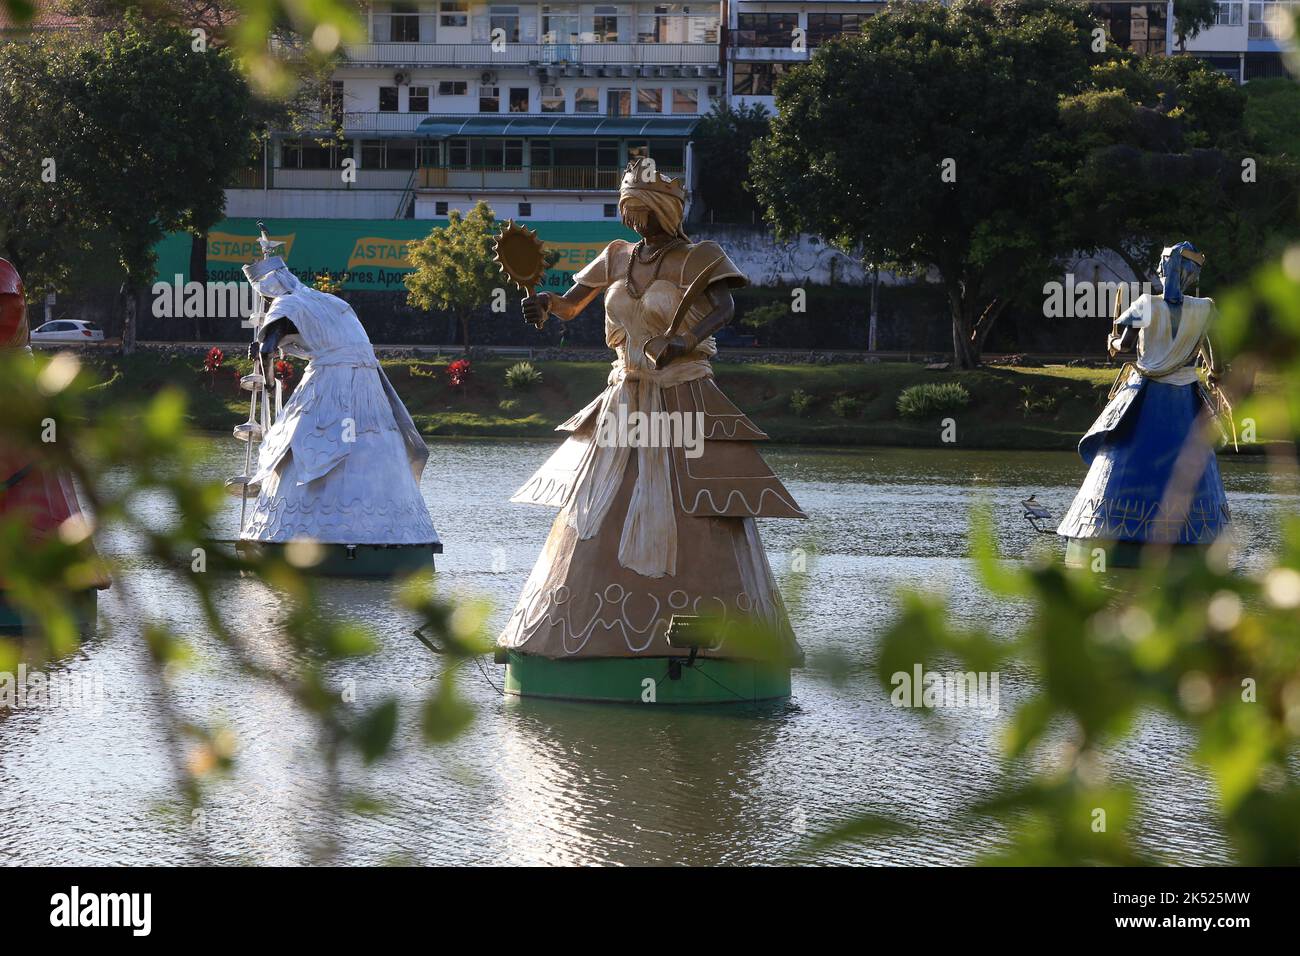 salvador, bahia, brazil - september 29, 2022: sculptures of Orixa - entity of African matter religions - exposed in the lake of Dique do Tororo, in th Stock Photo